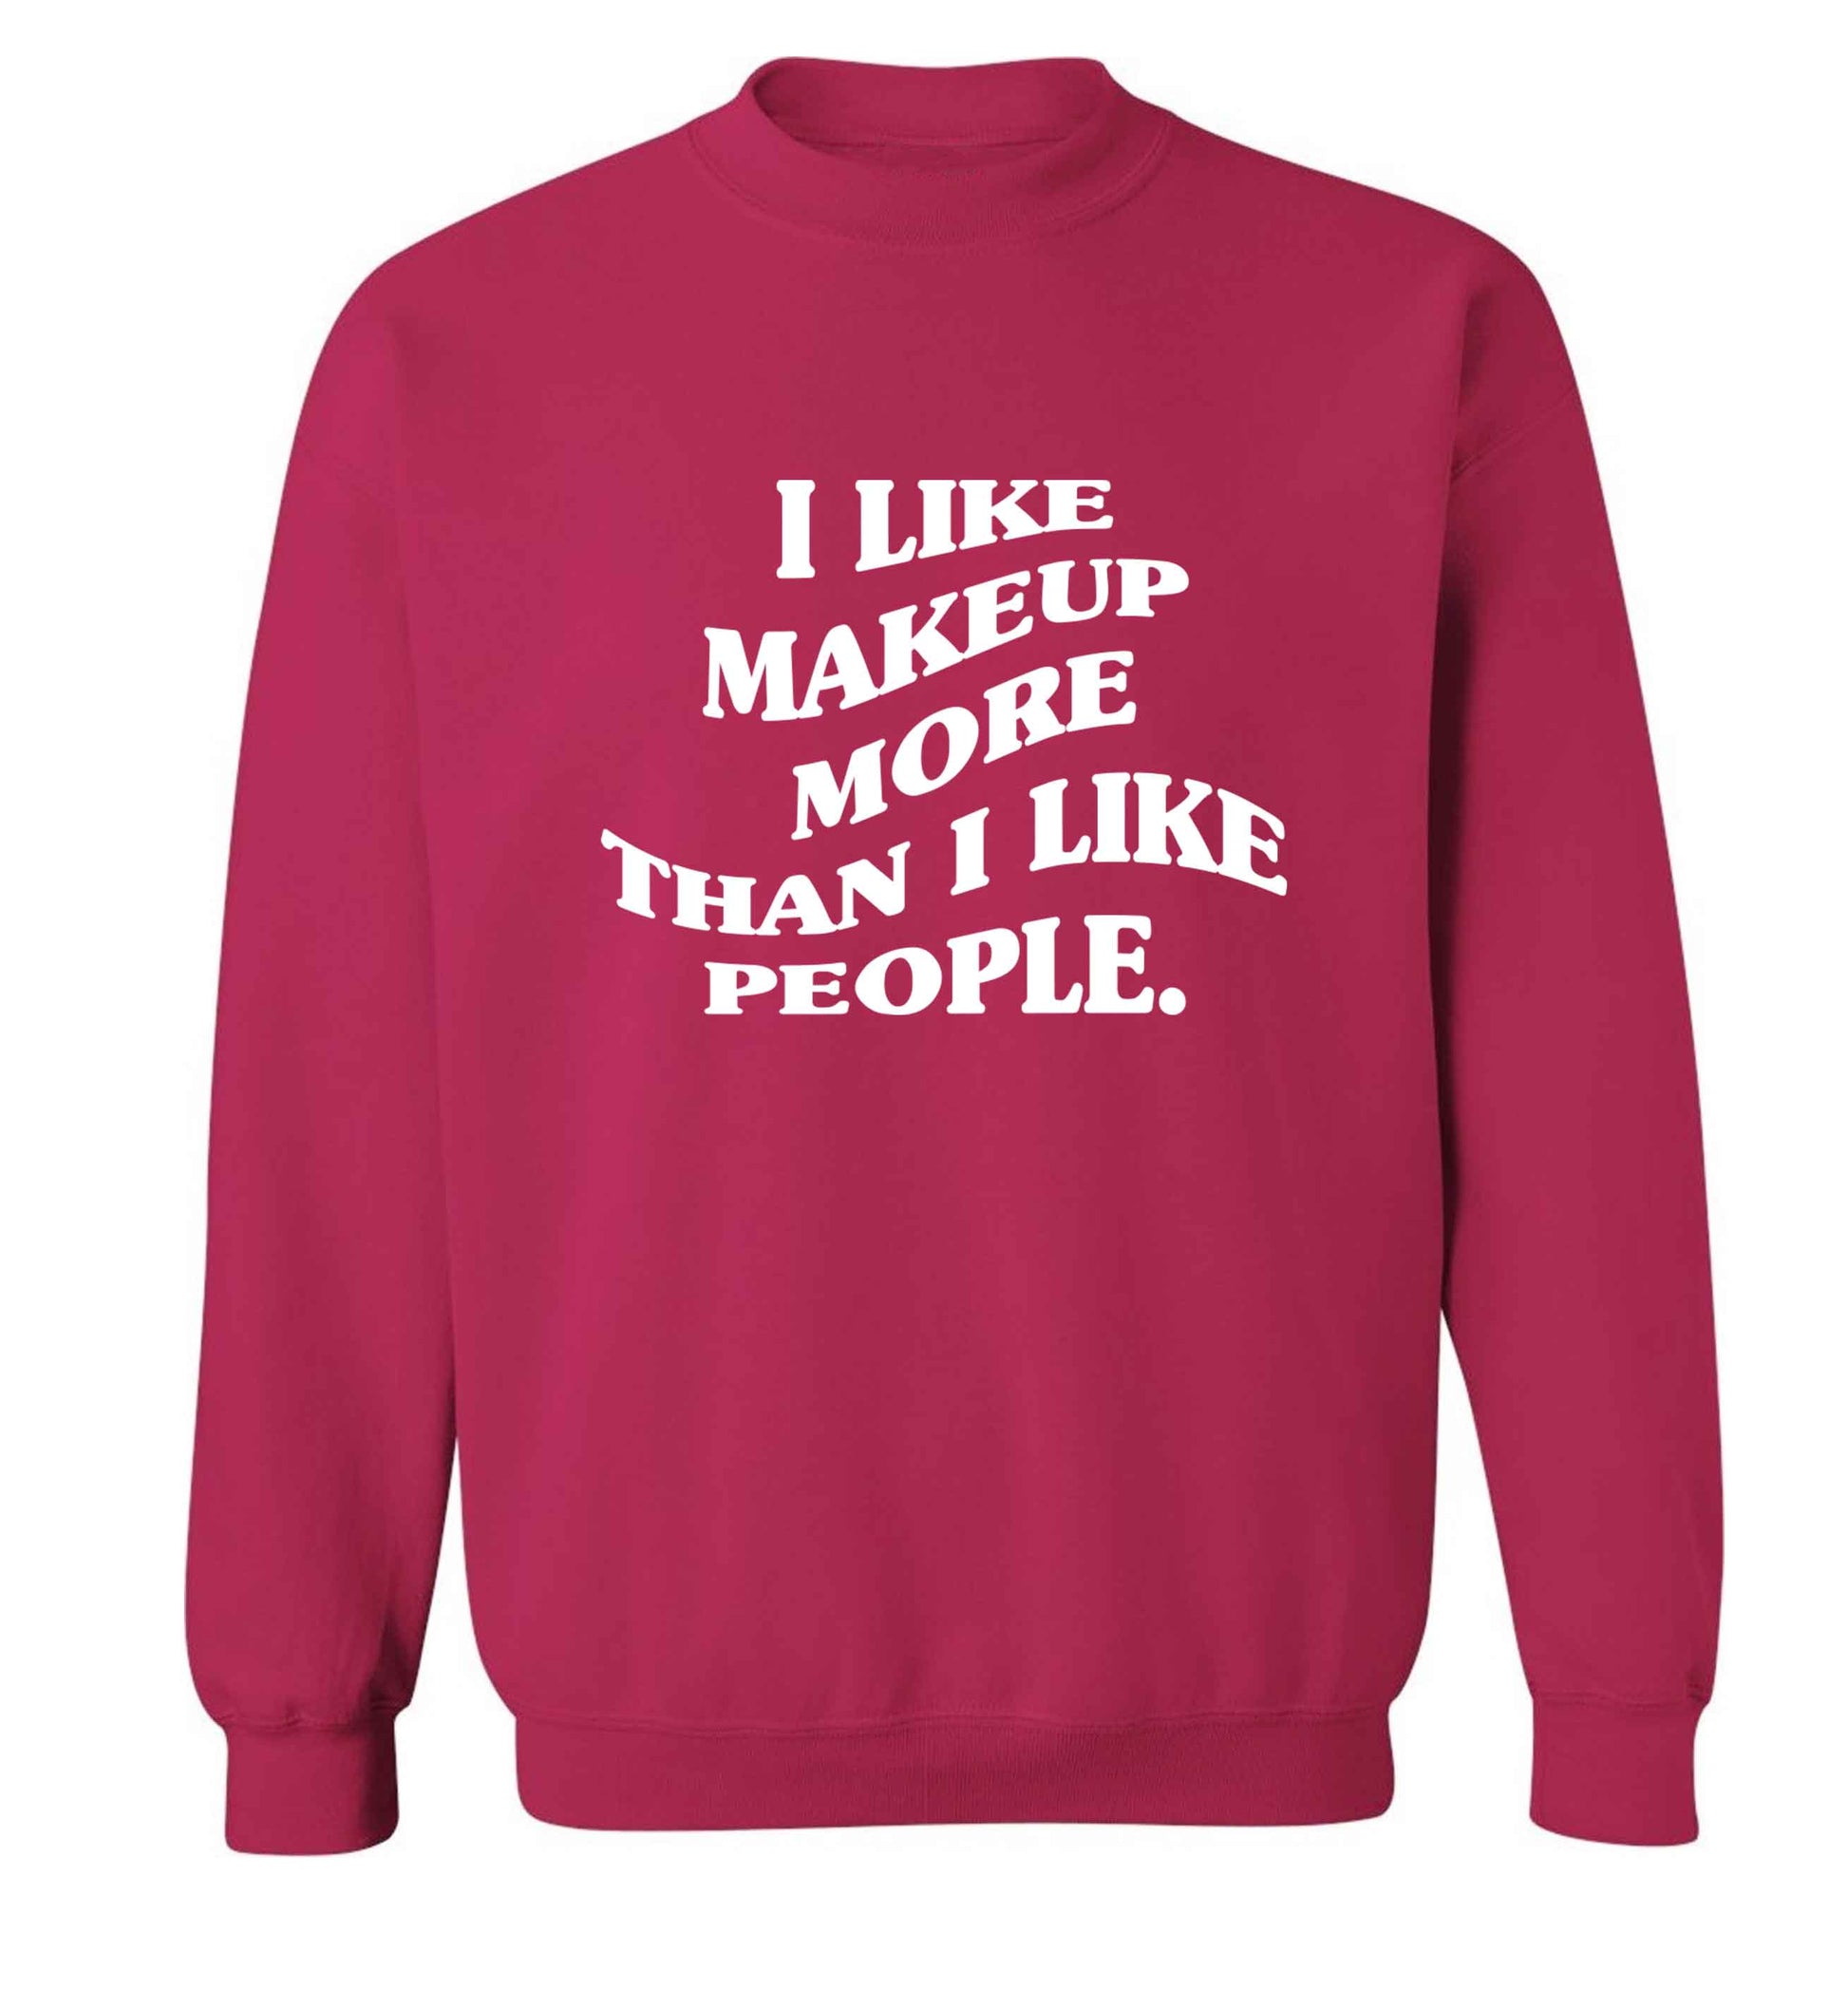 I like makeup more than people adult's unisex pink sweater 2XL